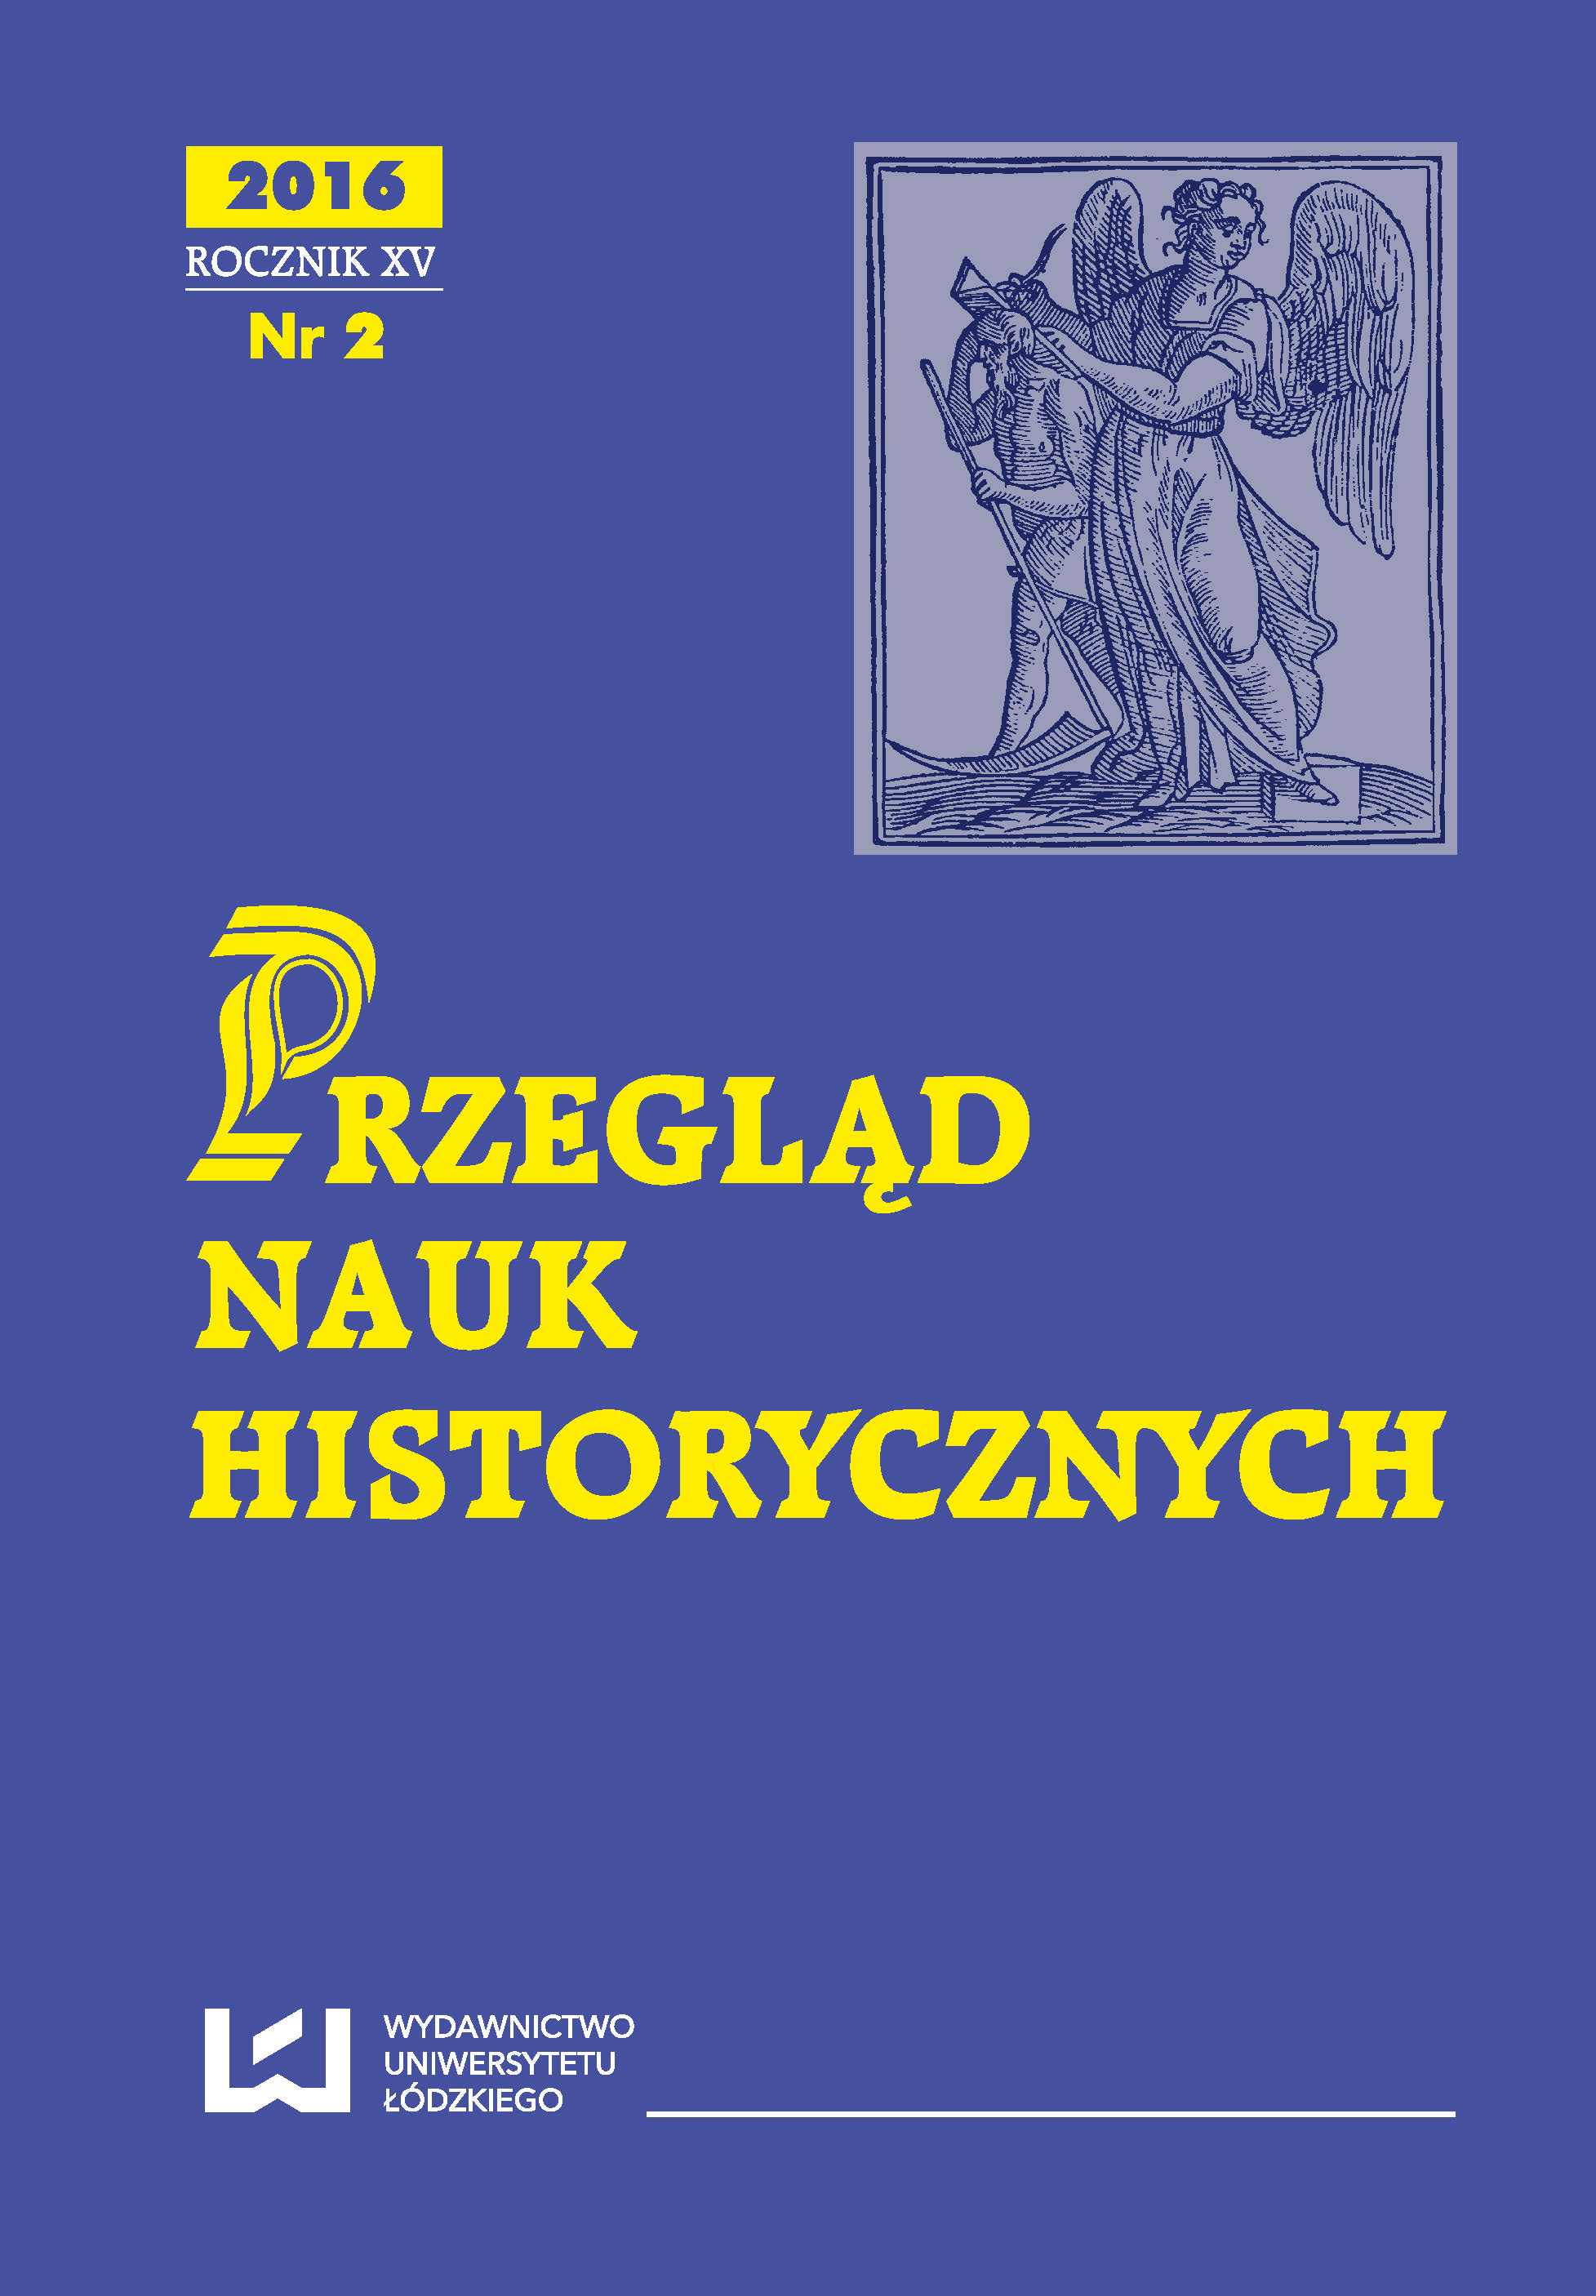 Social structure of the population of the Poznań voivodship in the light of common censuses of the II Republic of Poland Cover Image